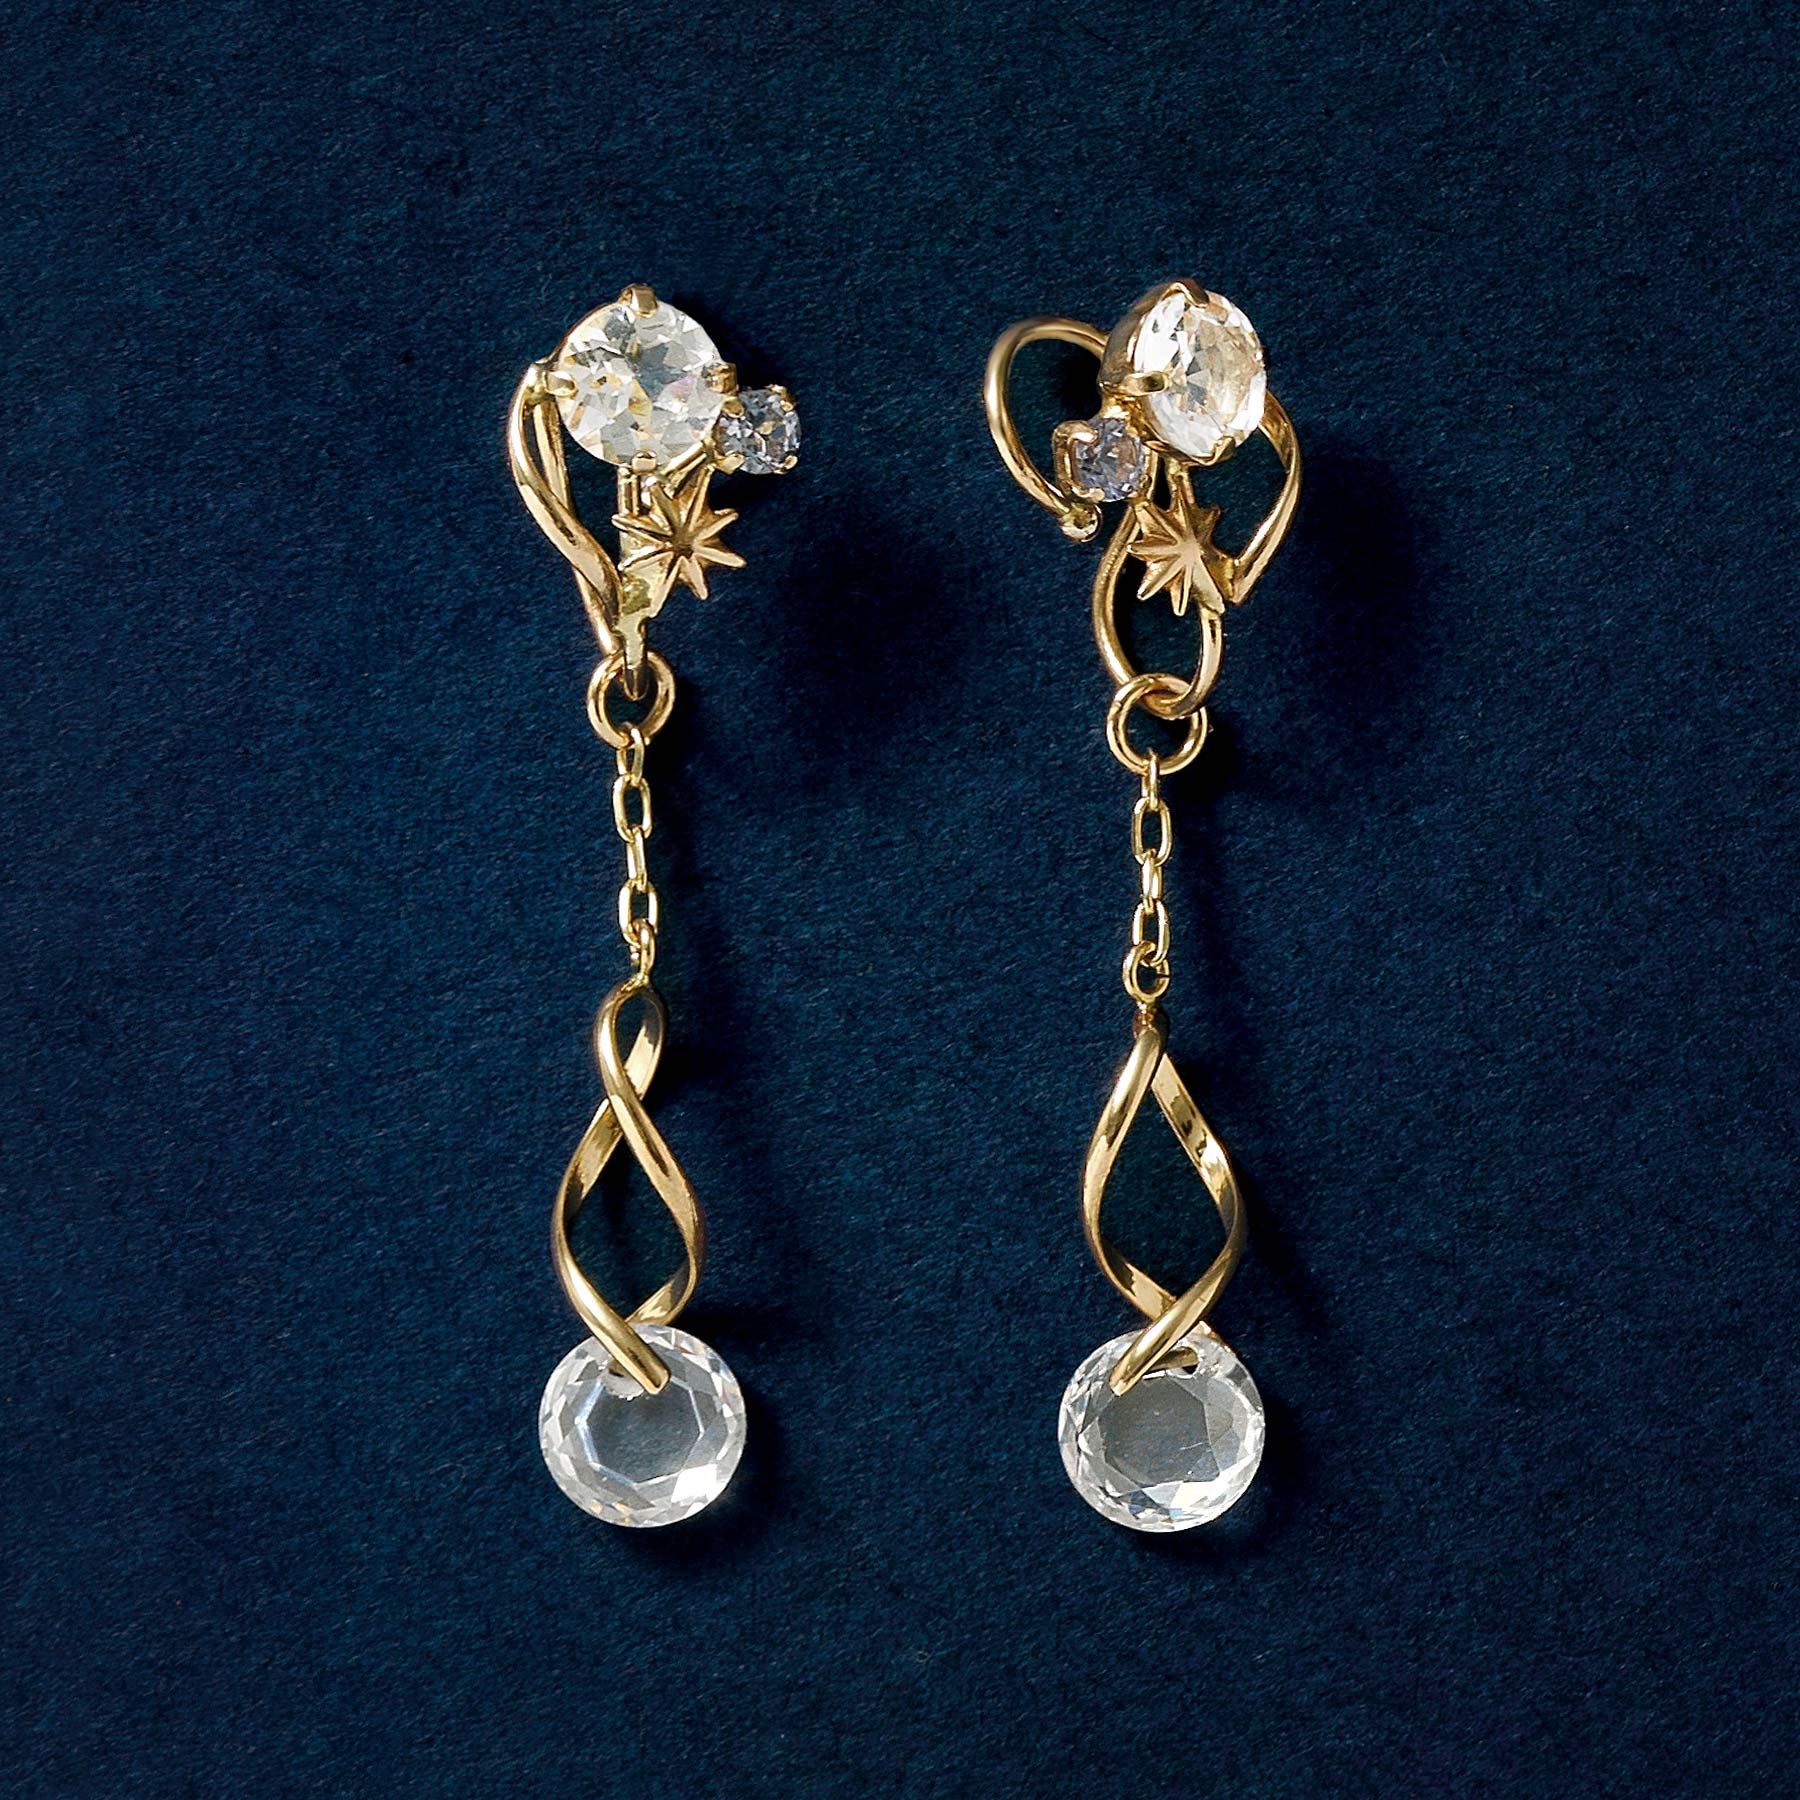 10K "Grain of Light" 2Way Clip-On Earrings (Yellow Gold) - Product Image